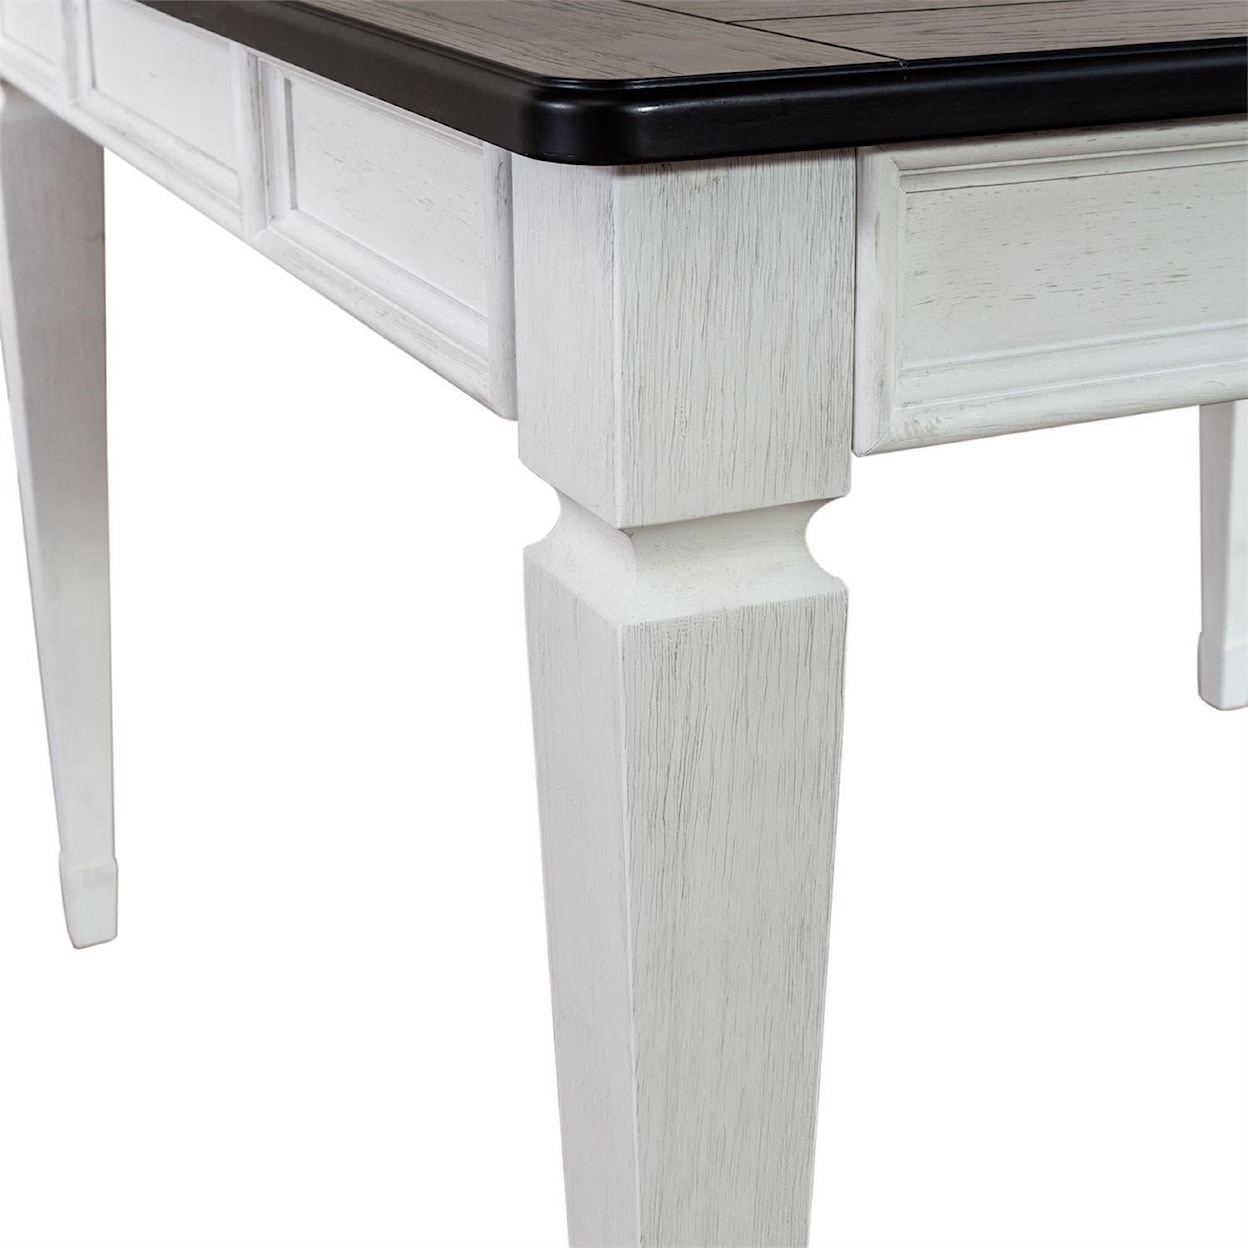 Liberty Furniture Allyson Park Counter Height Dining Table